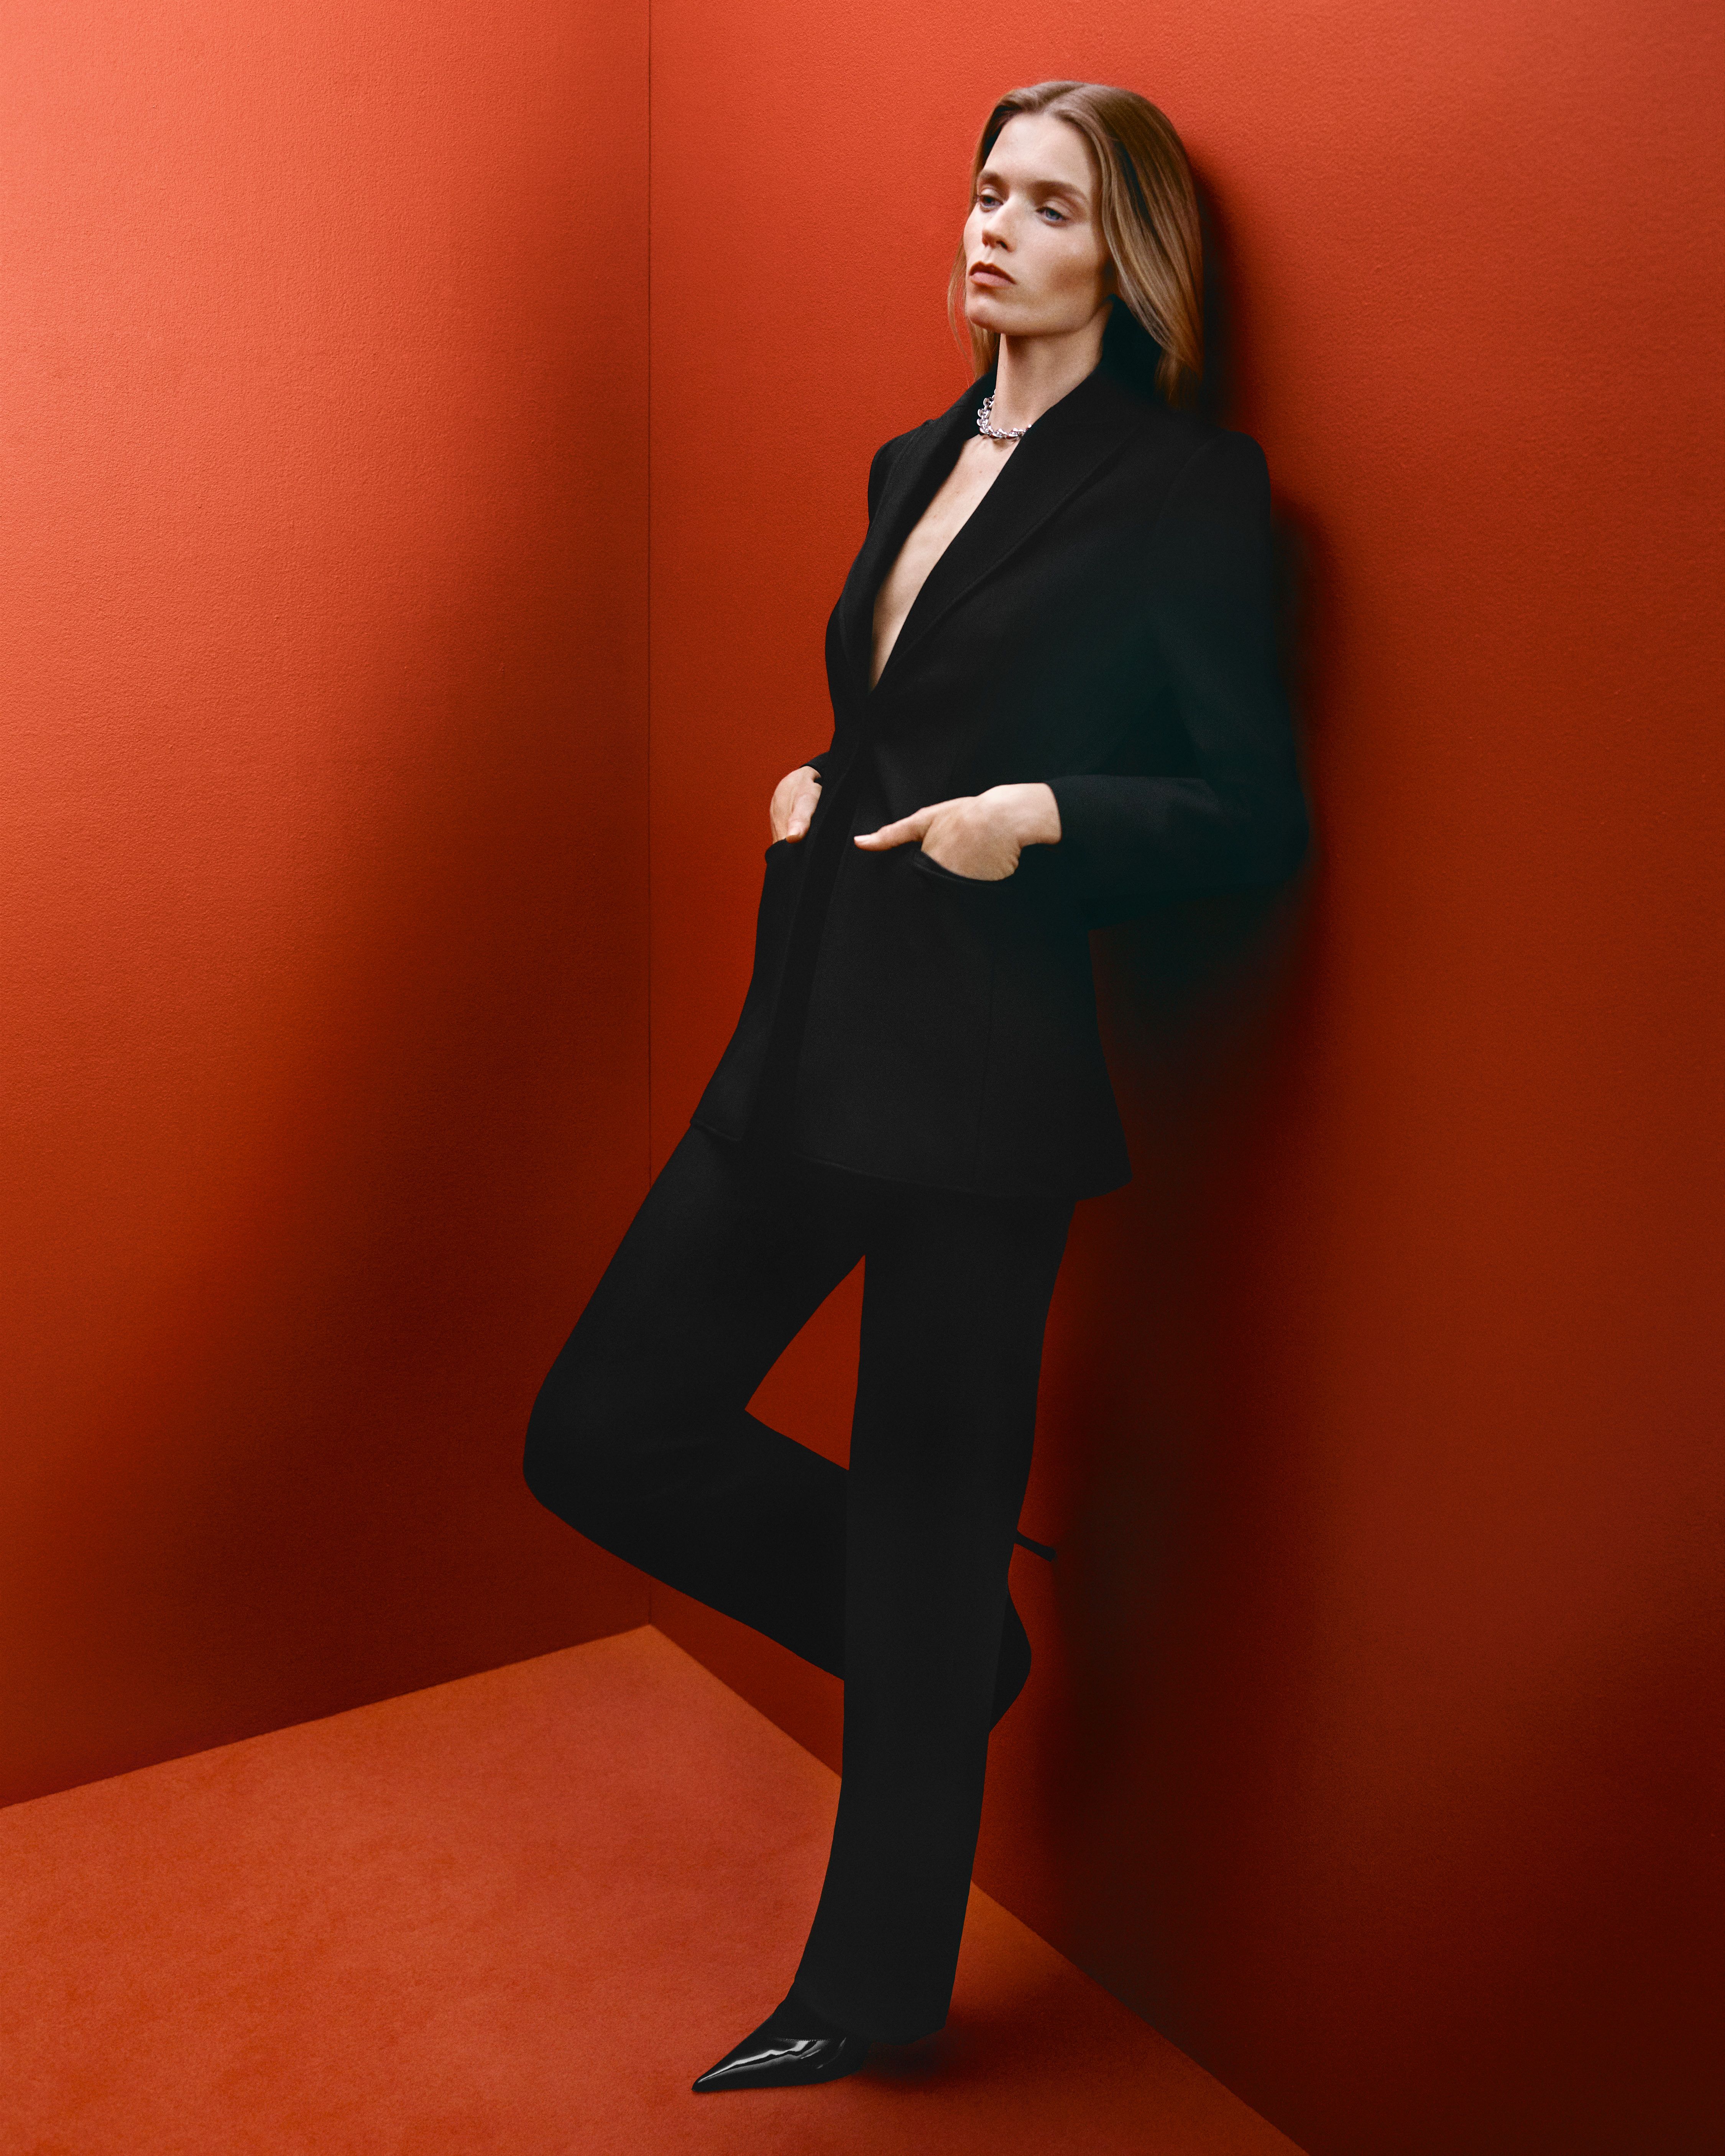 Abbey Lee leaning against the wall in a red room with hands in pockets wearing a black suit